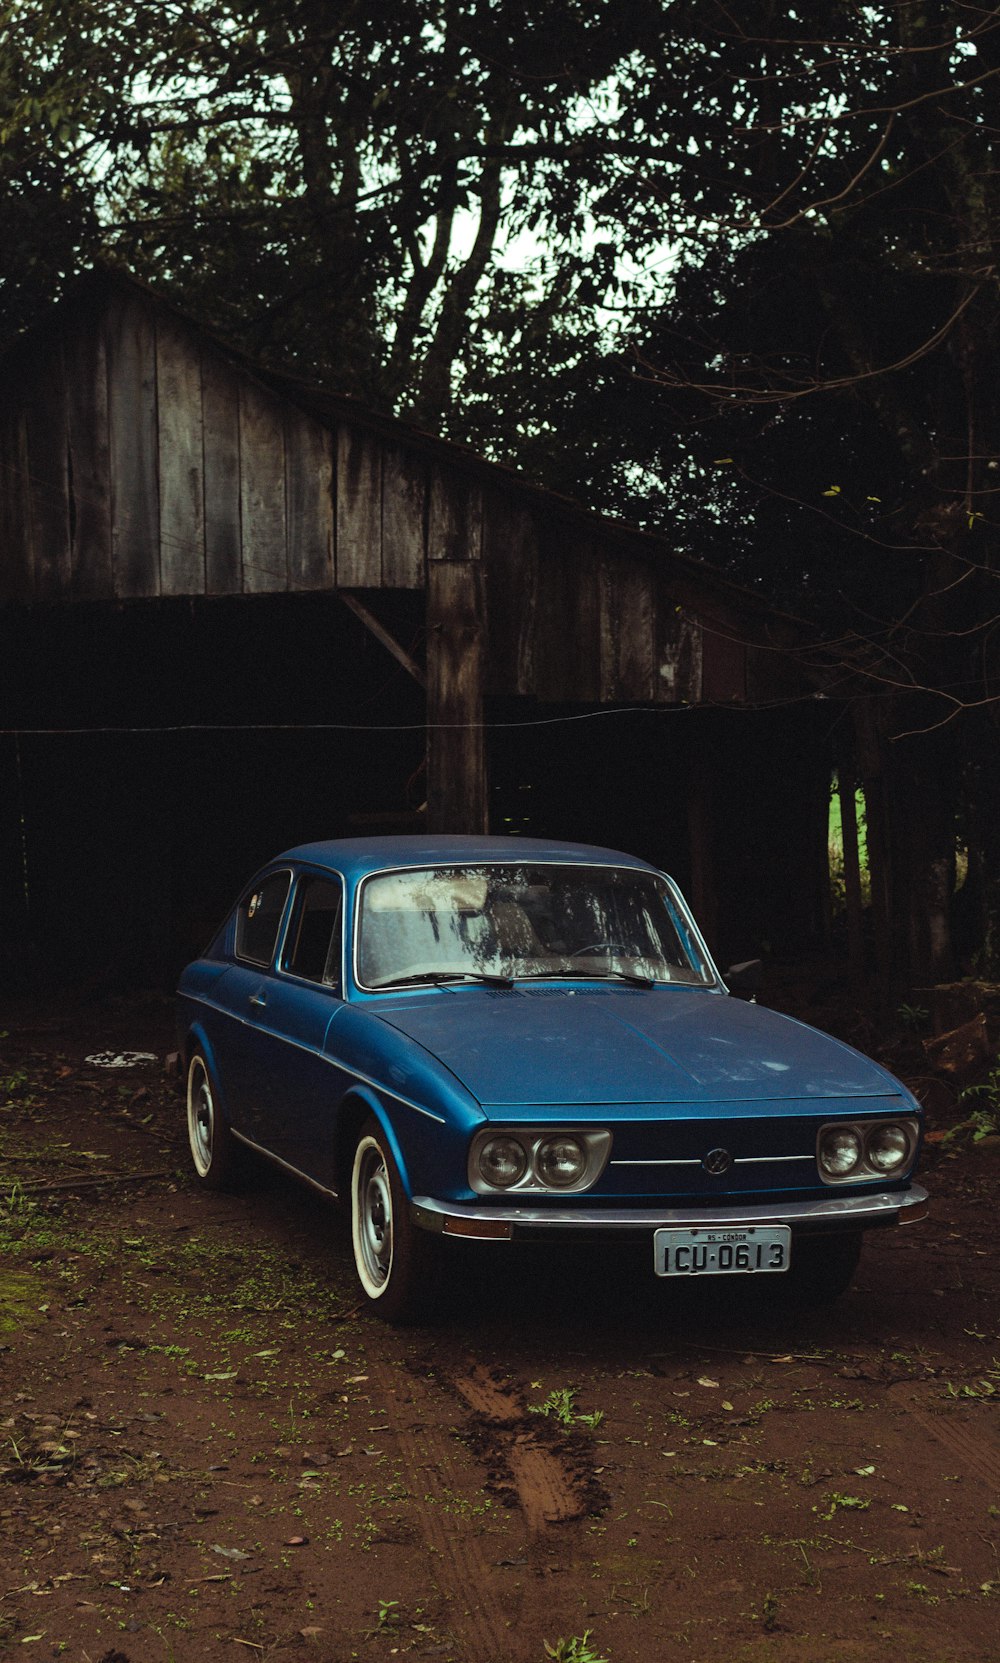 a blue car parked in front of a wooden structure